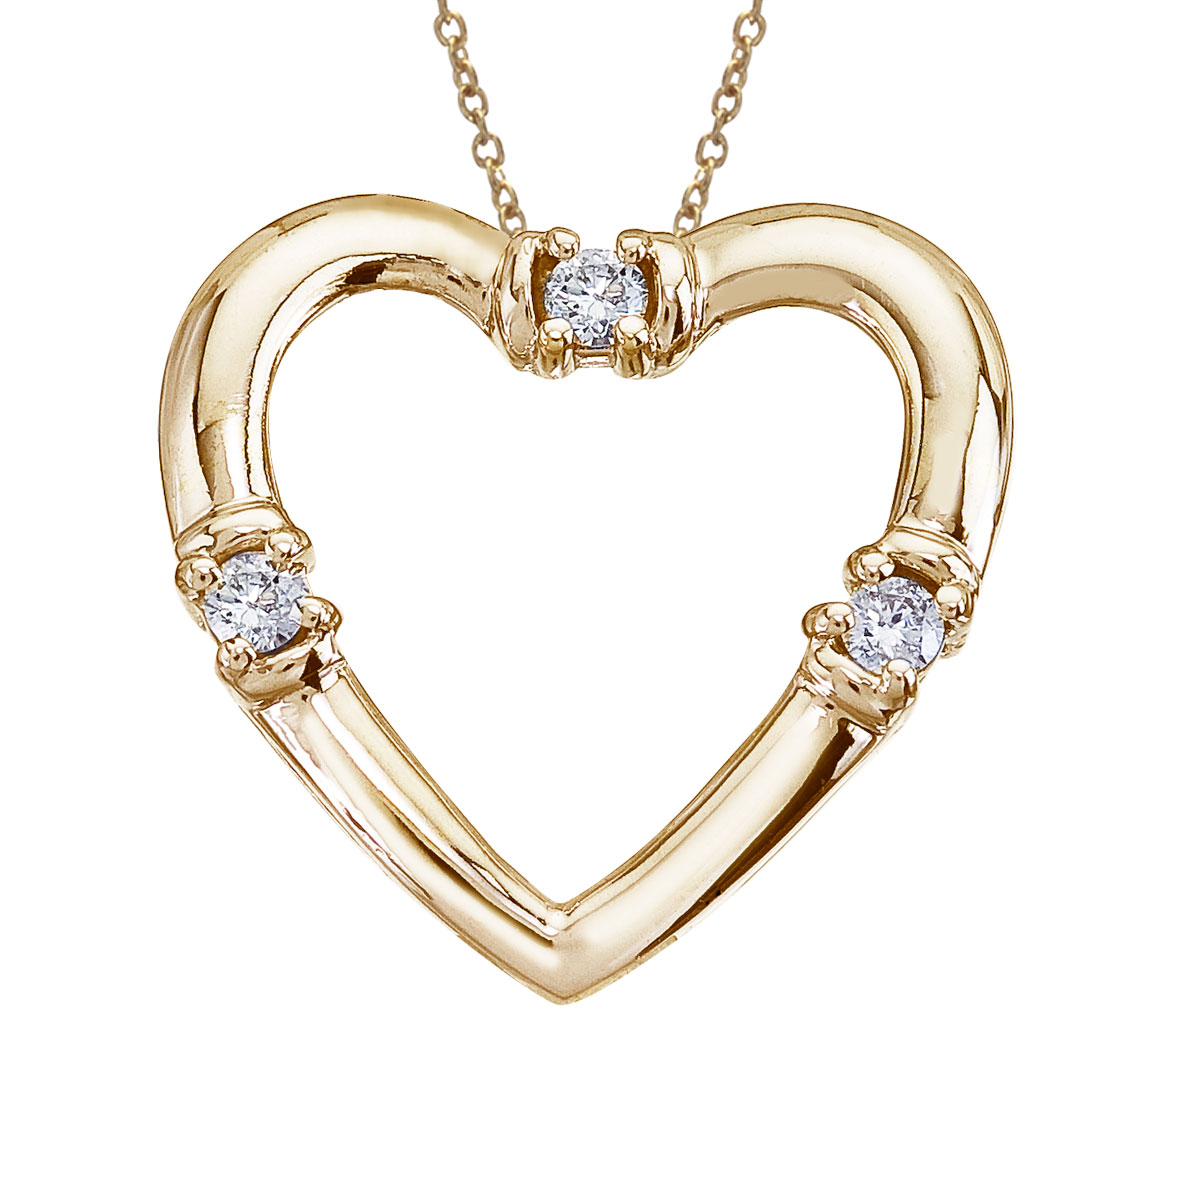 JCX2949: Heart shaped 14k yellow gold pendant with radiant diamonds to symbolize true love.